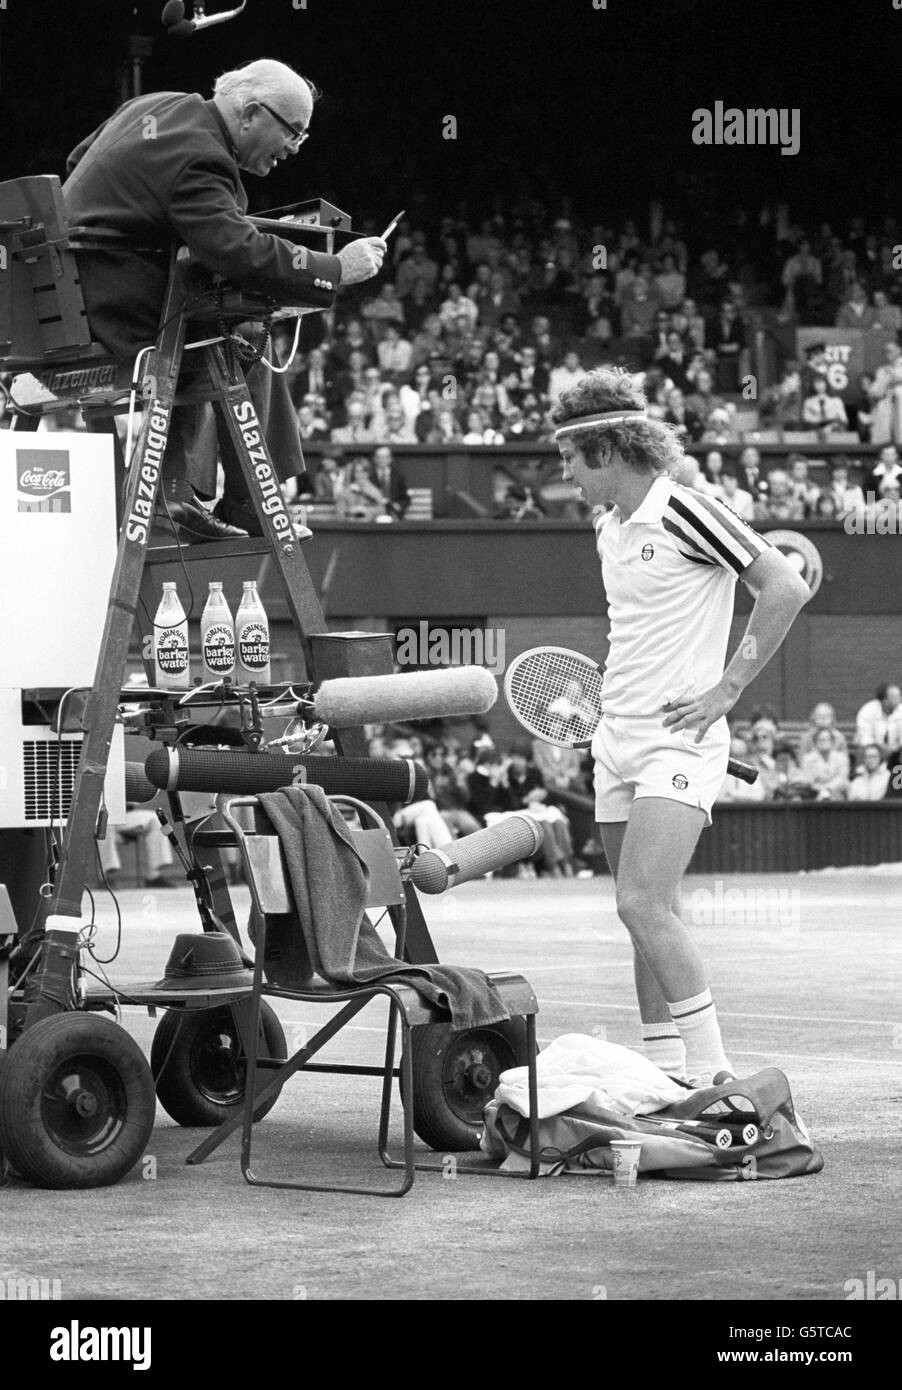 A frequently temperamental John McEnroe argues a point with umpire Pat Smythe on Wimbledon Centre Court during his match against Jimmy Connors. Stock Photo